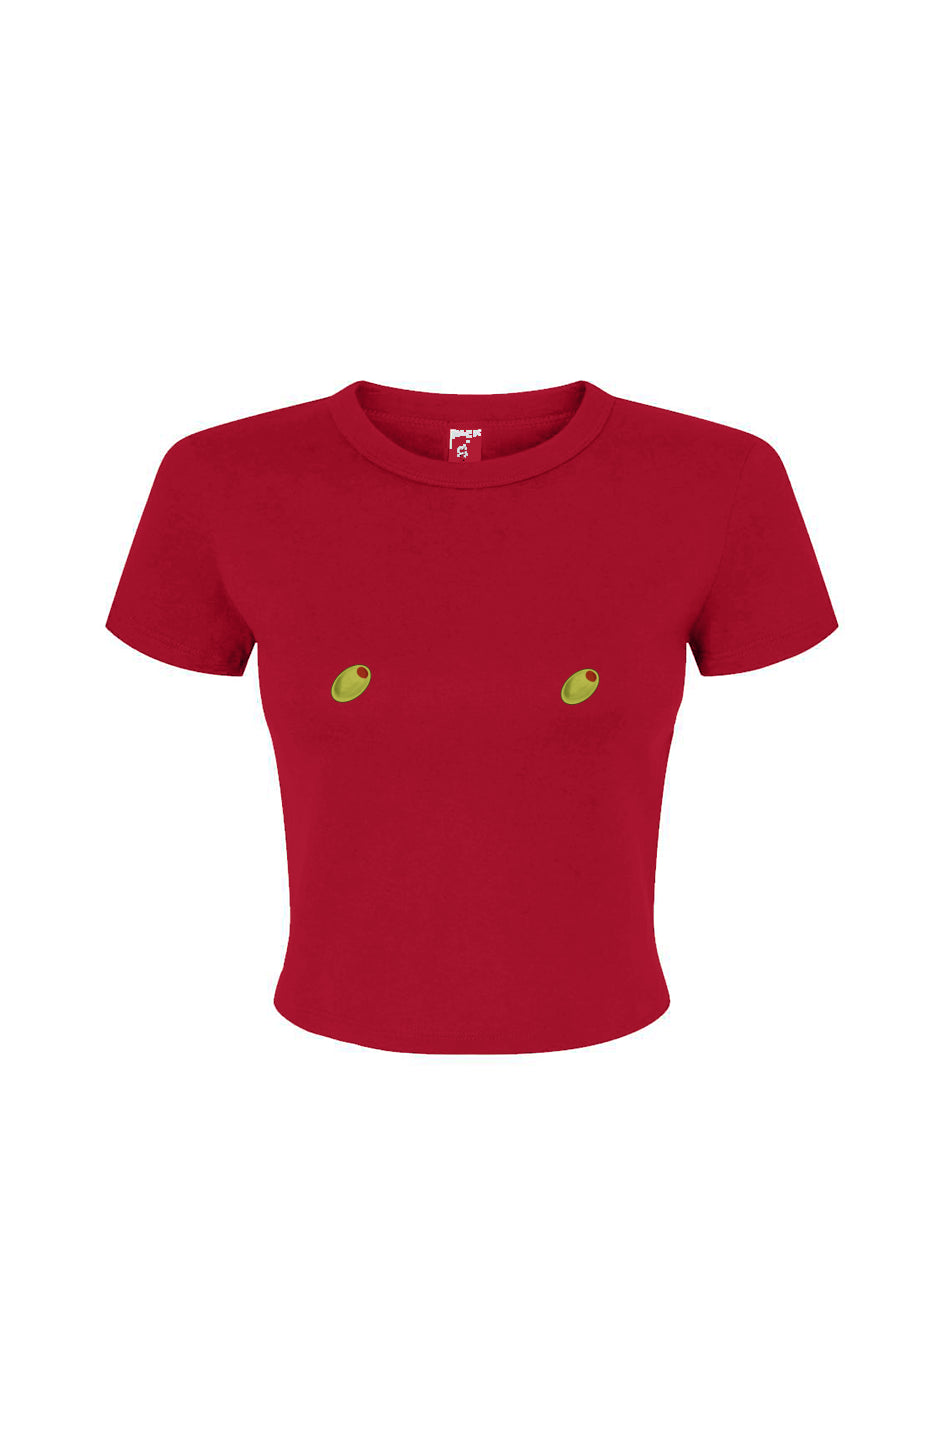 Olive Nips Fitted Baby Tee